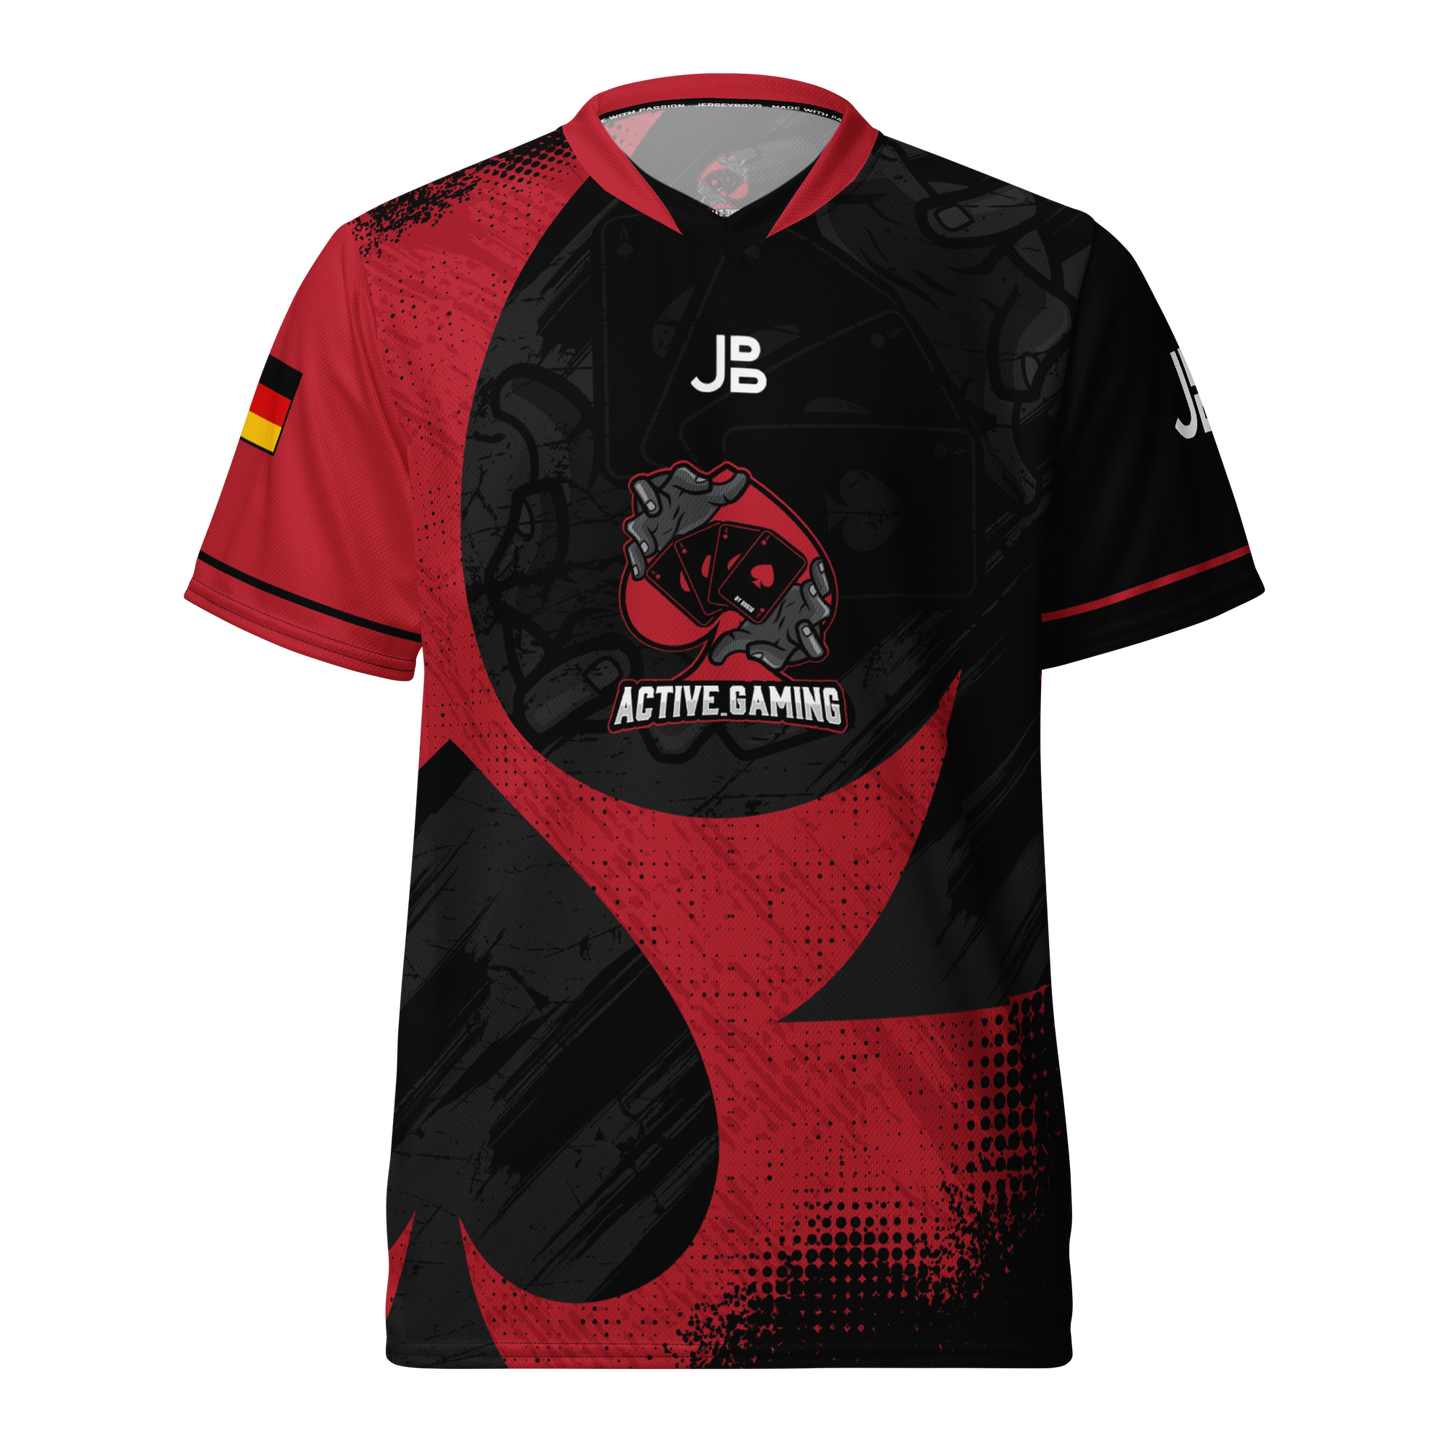 ACTIVE GAMING - Jersey 2022